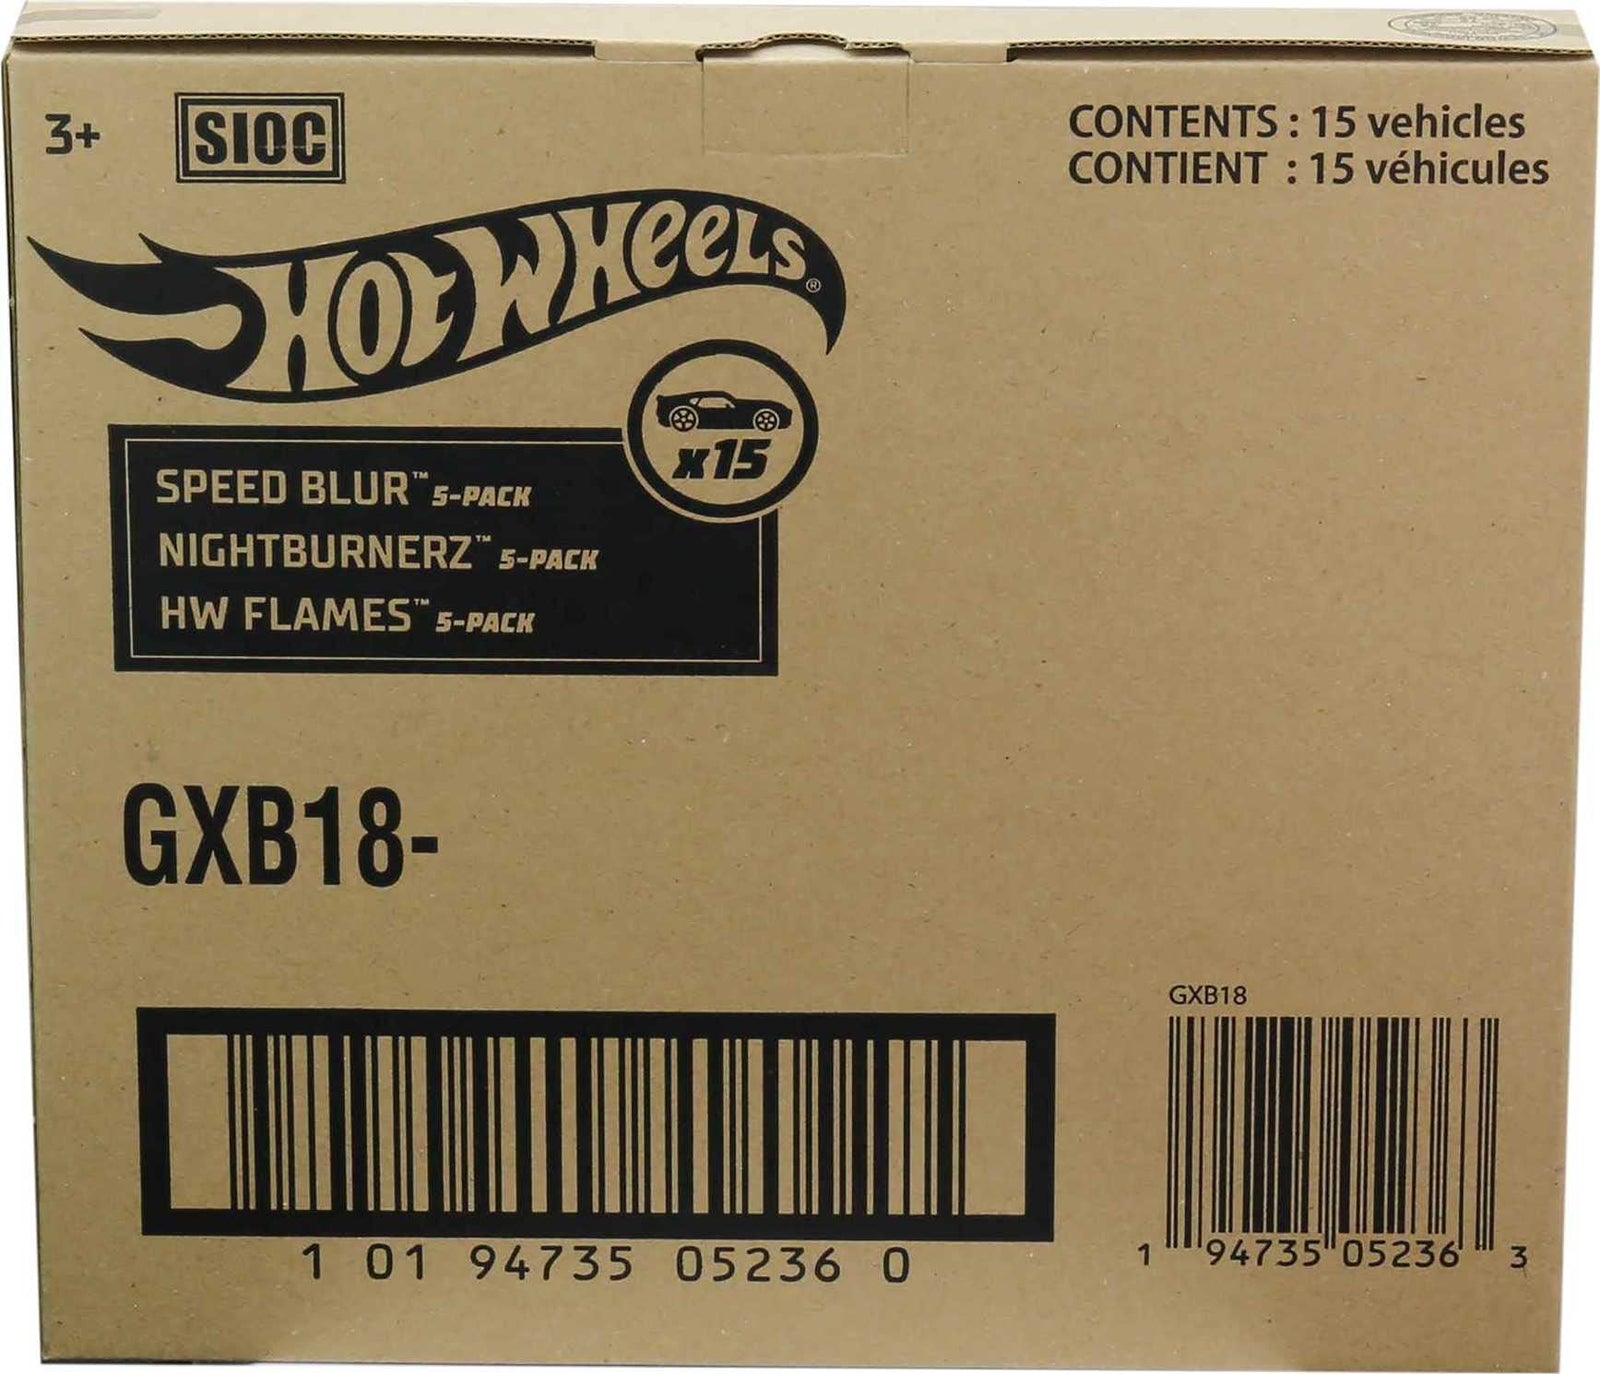 Hot Wheels Fast Pack 5-Pack Bundle with 15 Cars, 3 5-Packs of 1:64 Scale Racing Vehicles Themed Speed Blur, Nightburnerz & HW Flames, Gift for Collectors & Kids 3 Years Old & Up [Amazon Exclusive]